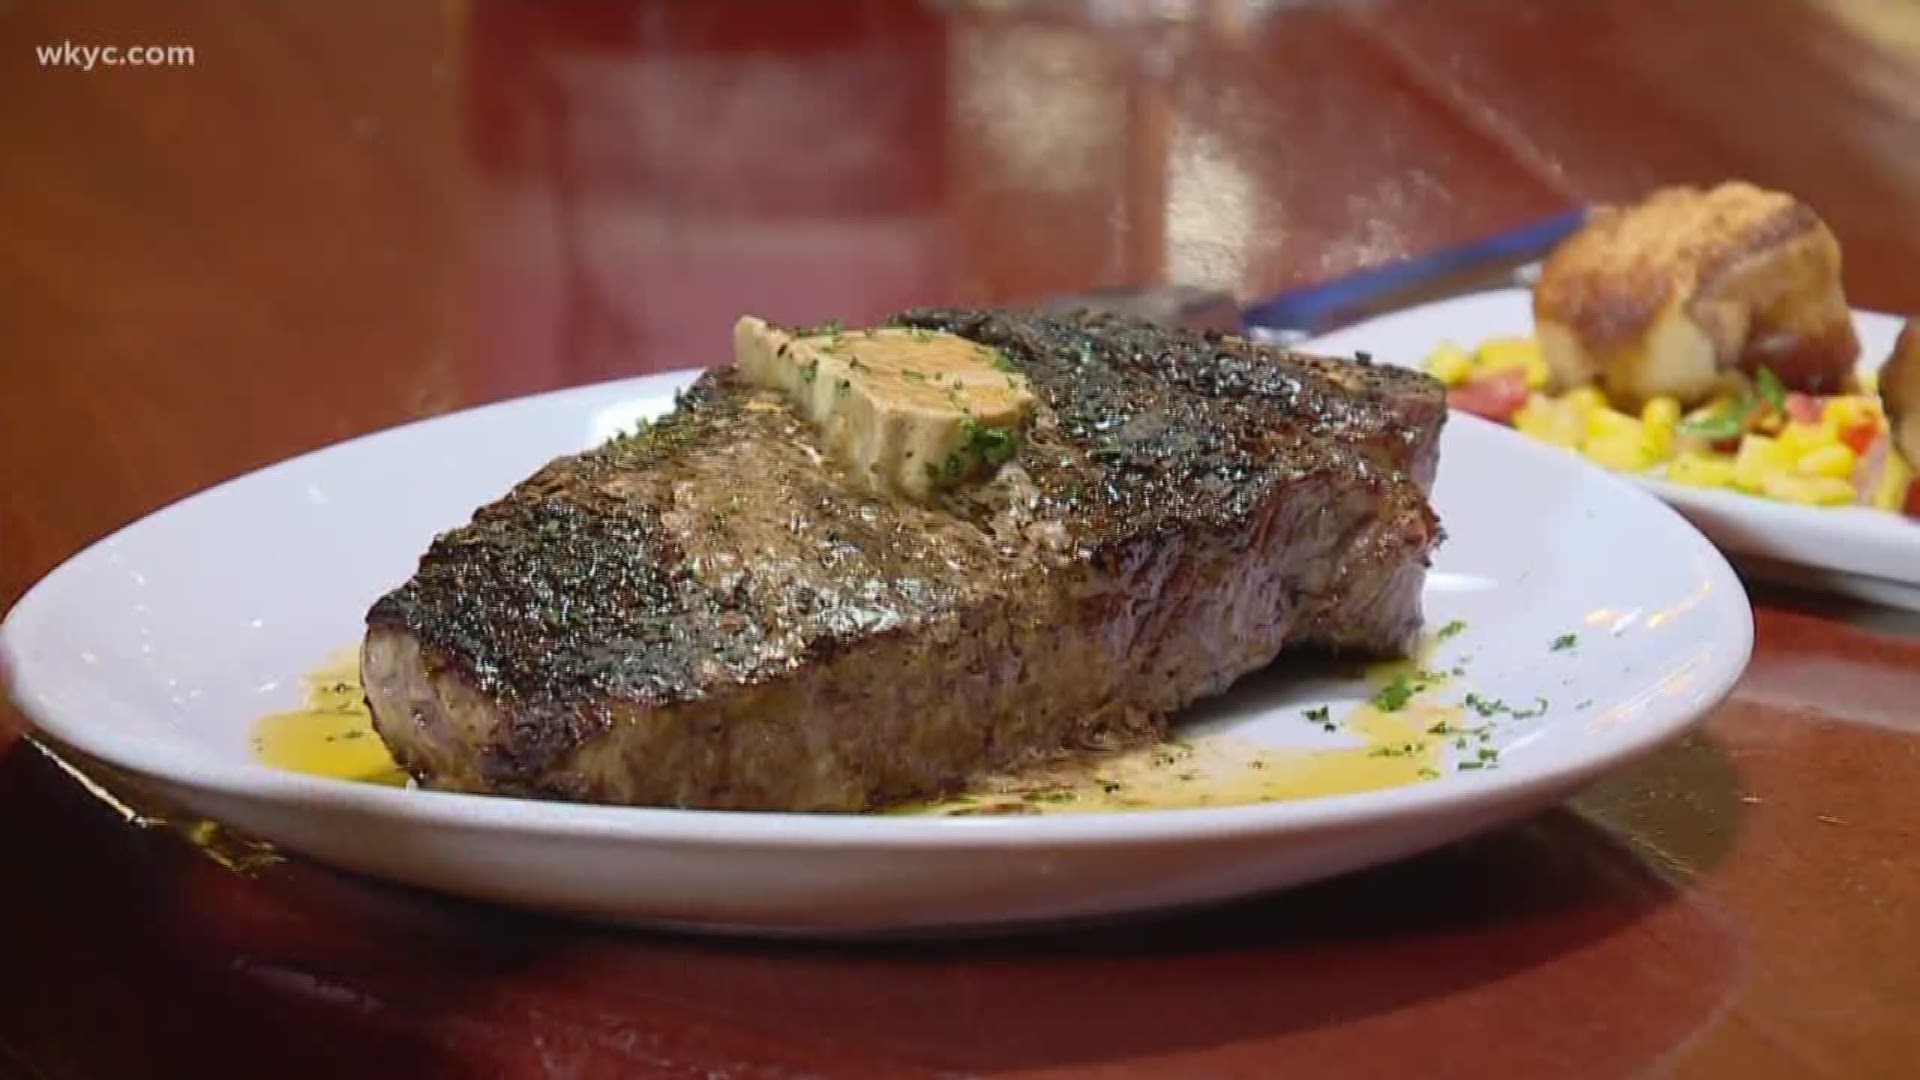 Nov. 7, 2018: Check out this steak! But that's not all... We also got to test out their bacon-wrapped scallops.